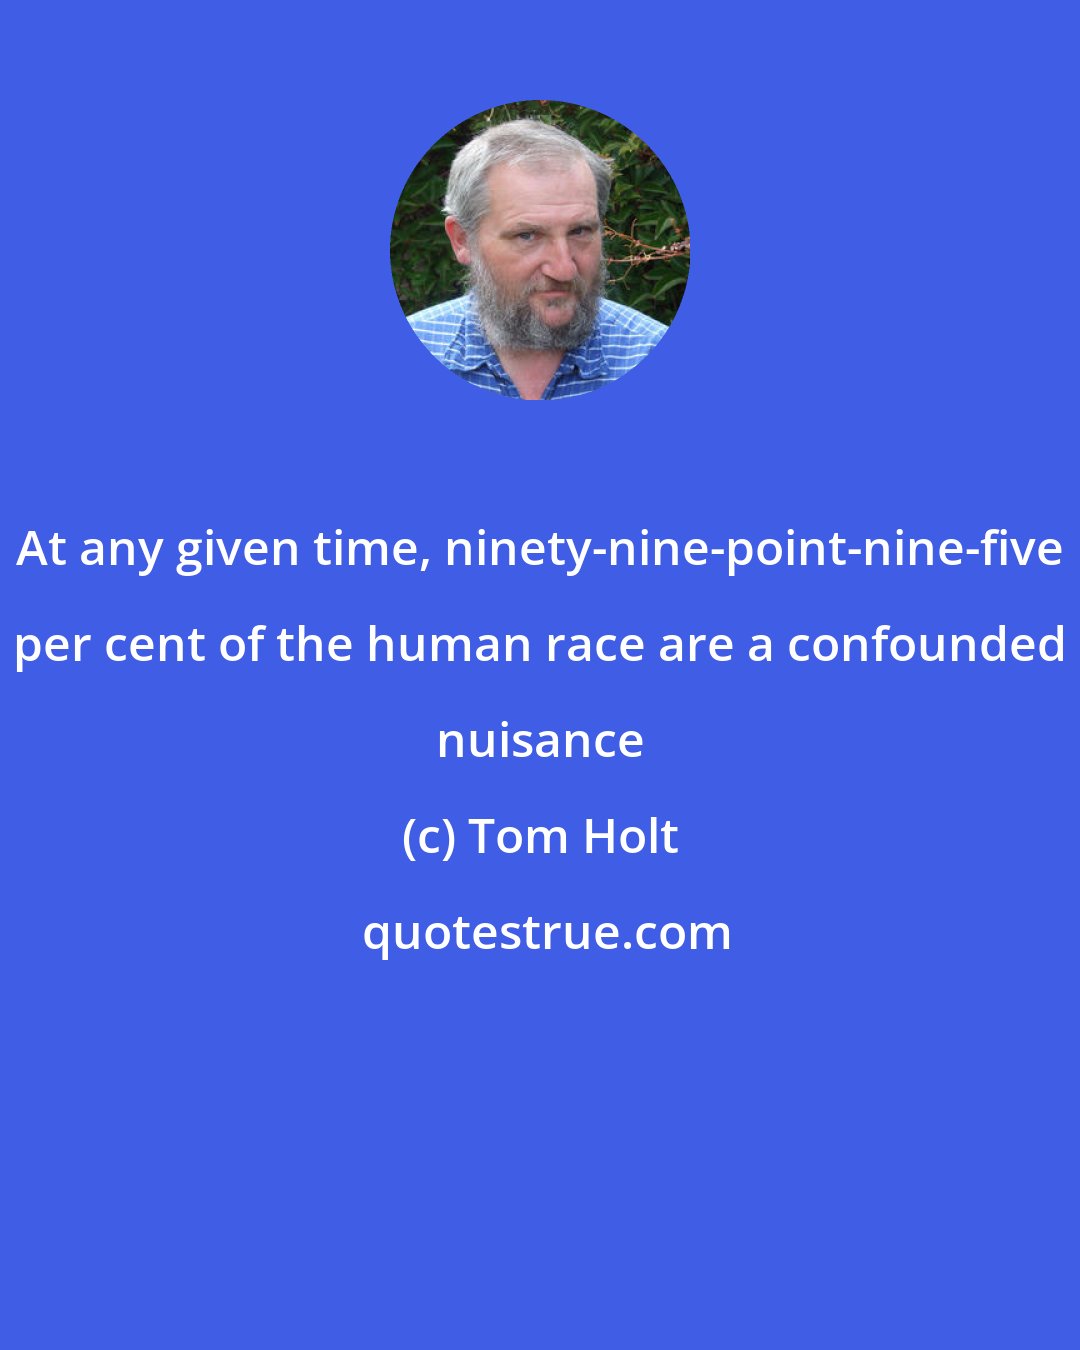 Tom Holt: At any given time, ninety-nine-point-nine-five per cent of the human race are a confounded nuisance